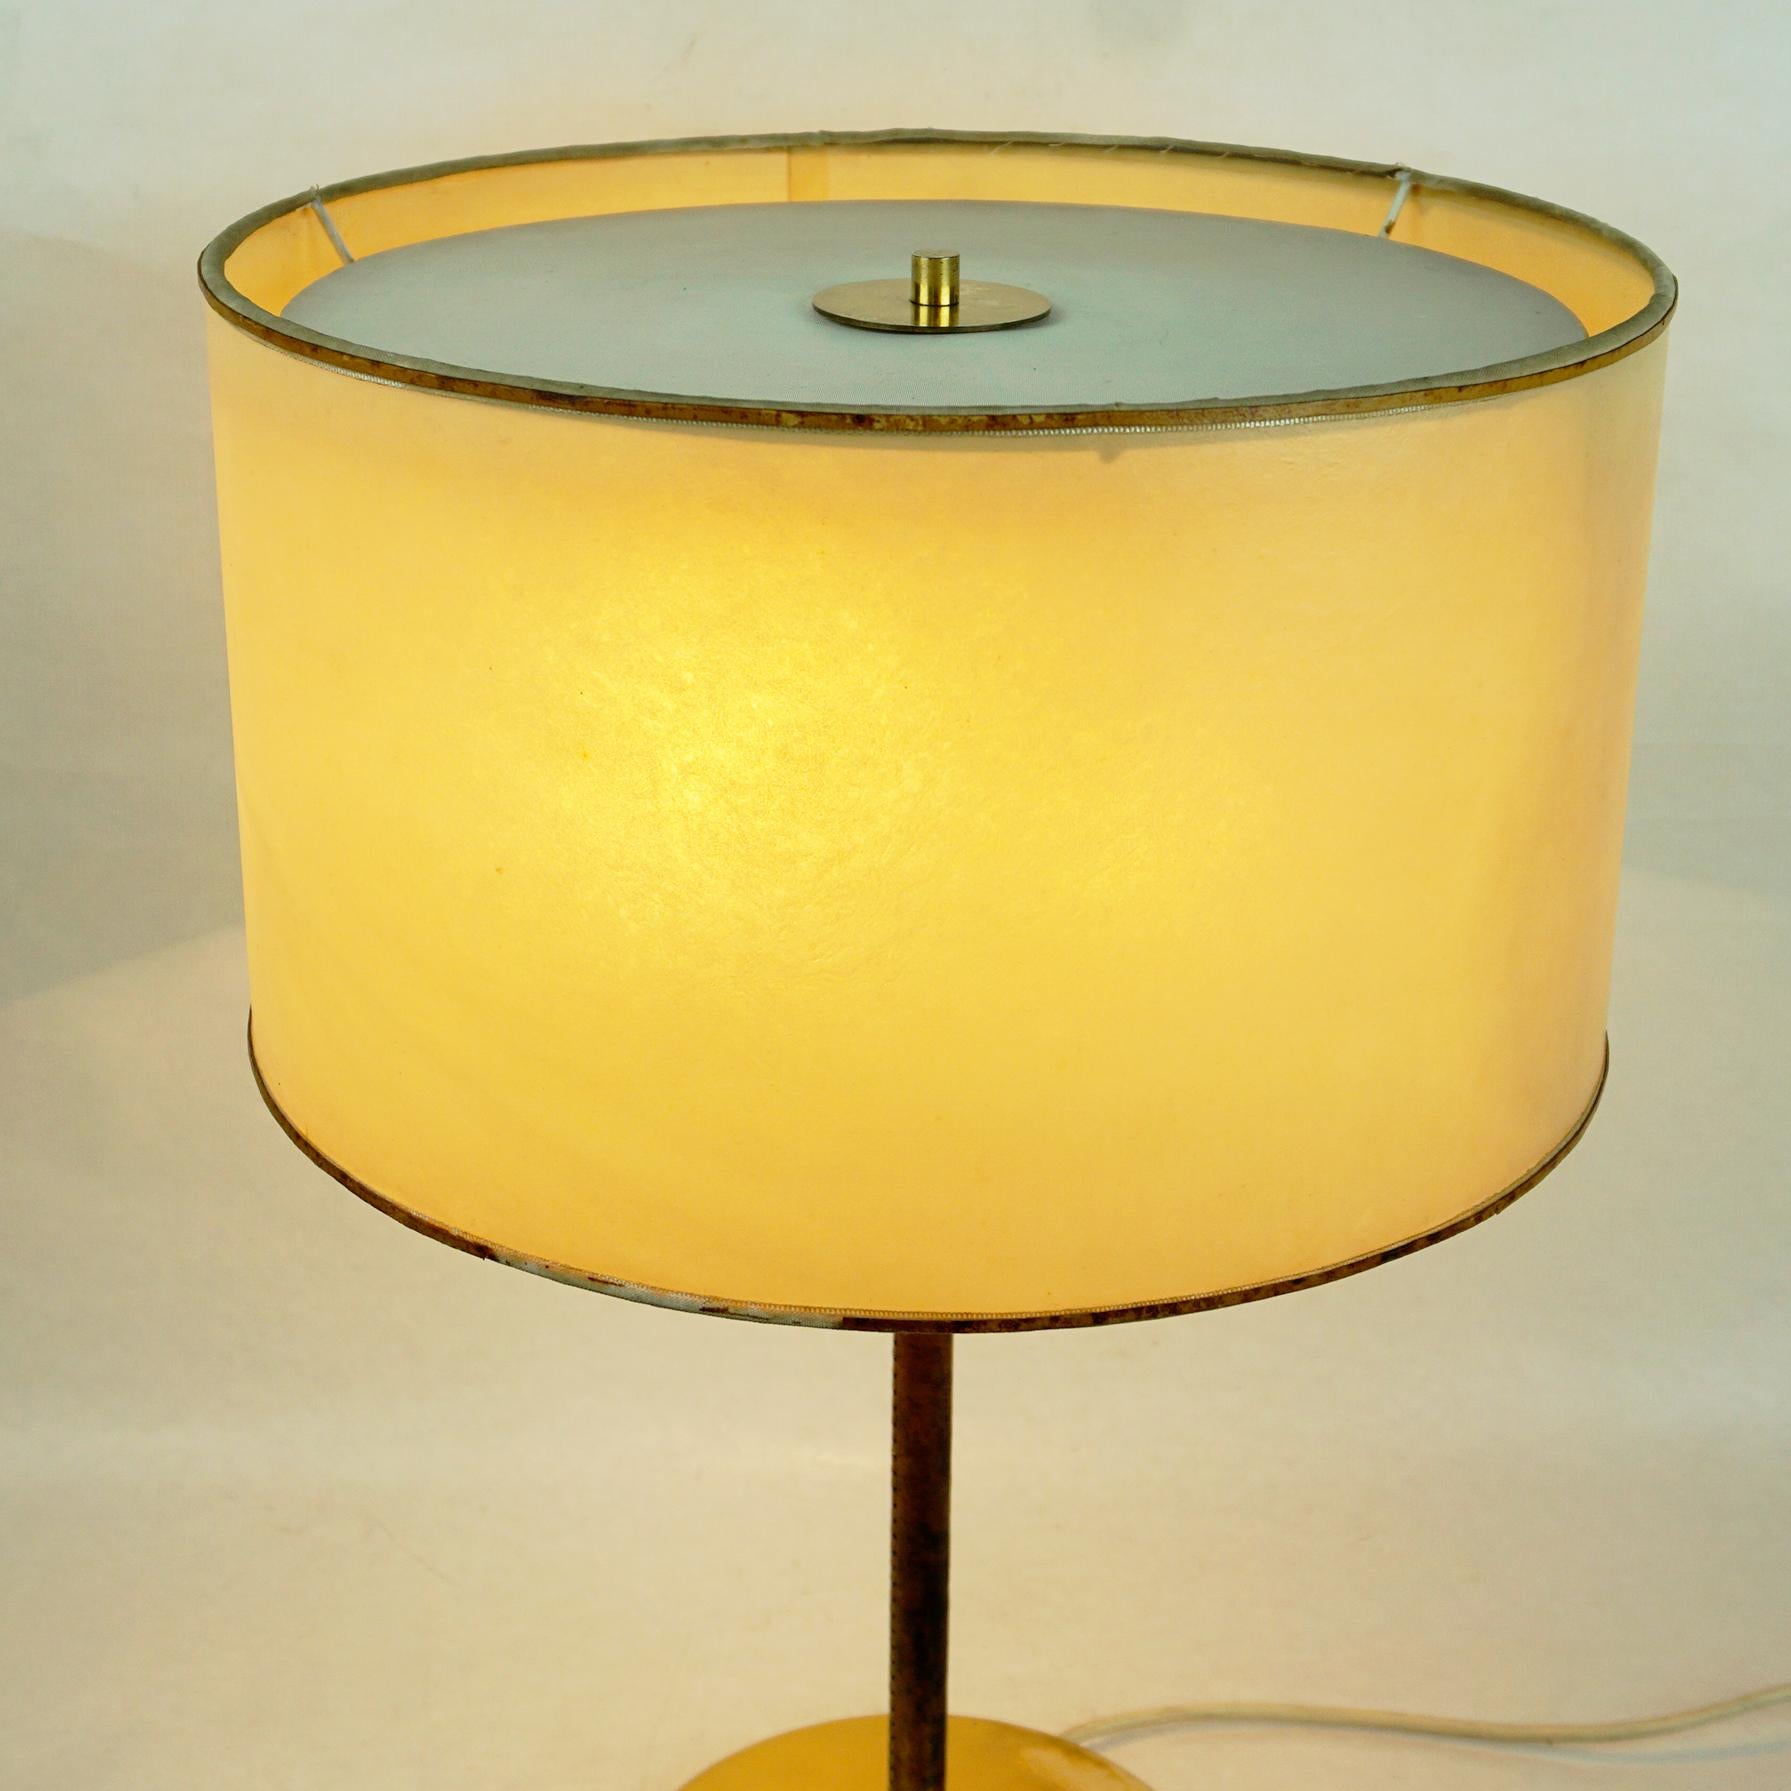 Austrian Midcentury Brass and Leather Table Lamp Mod. 1268 Essen by J. T. Kalmar For Sale 4